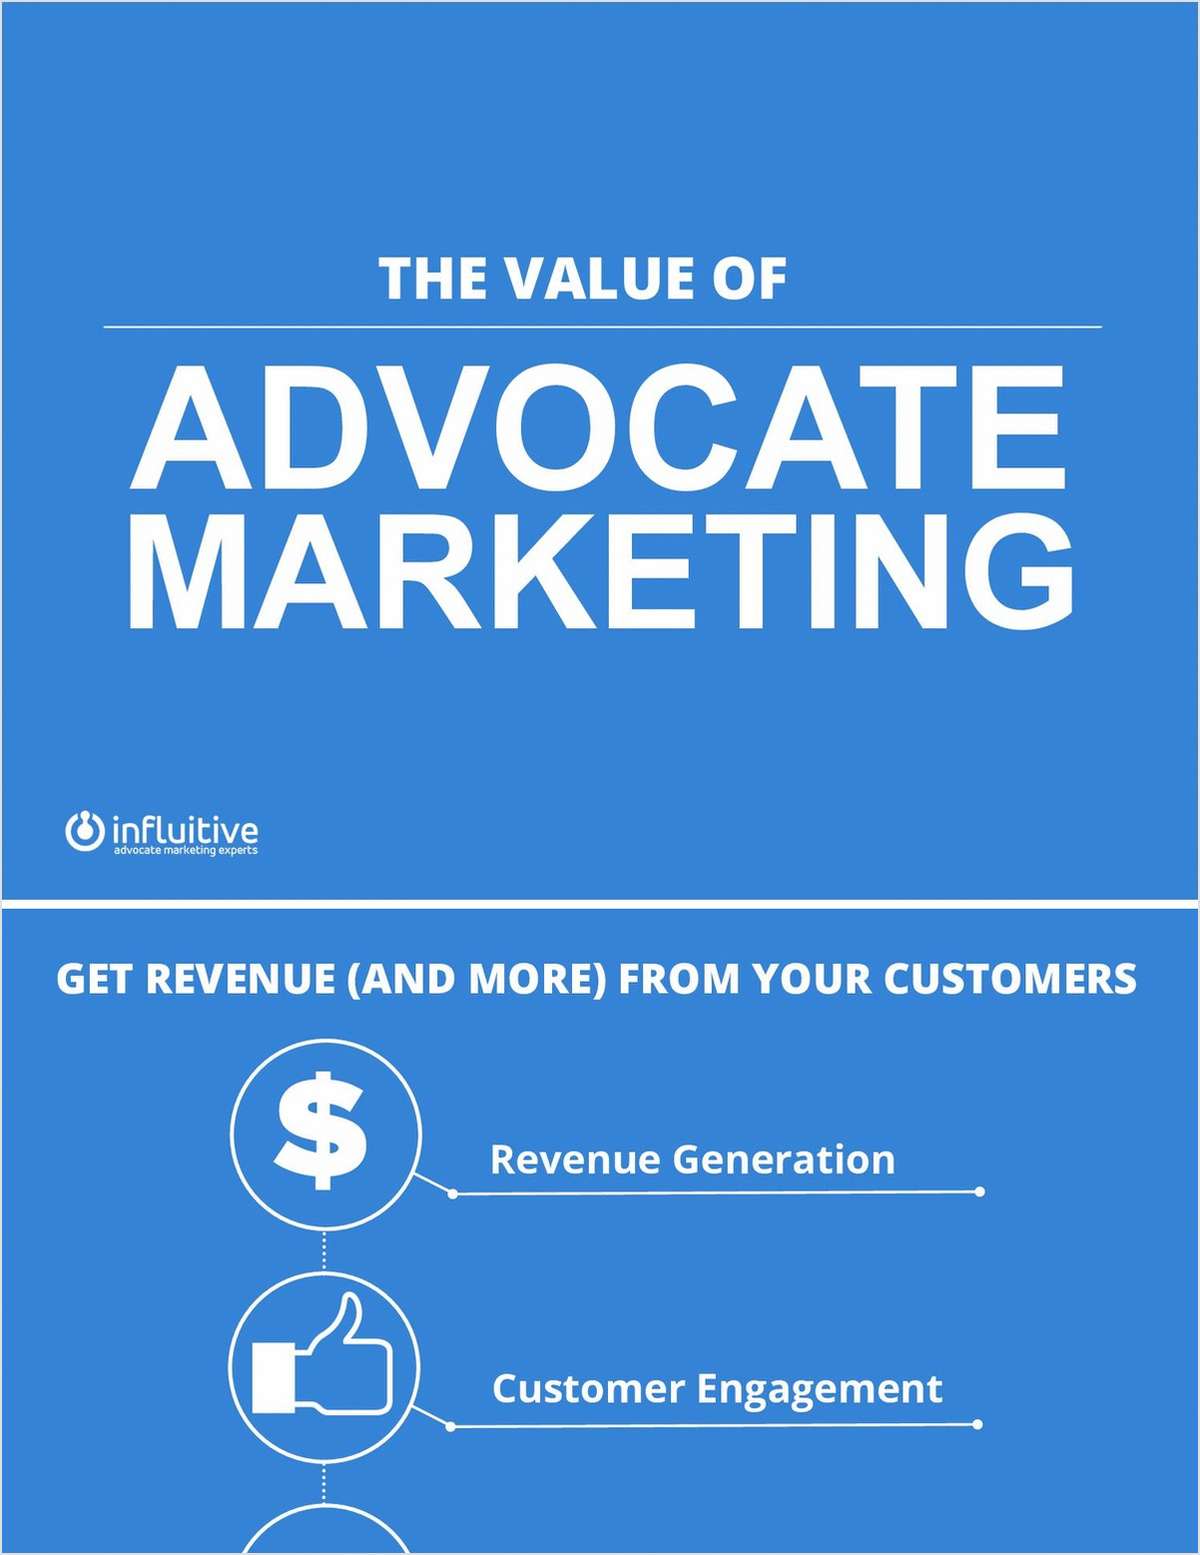 Measuring the Value of Advocate Marketing